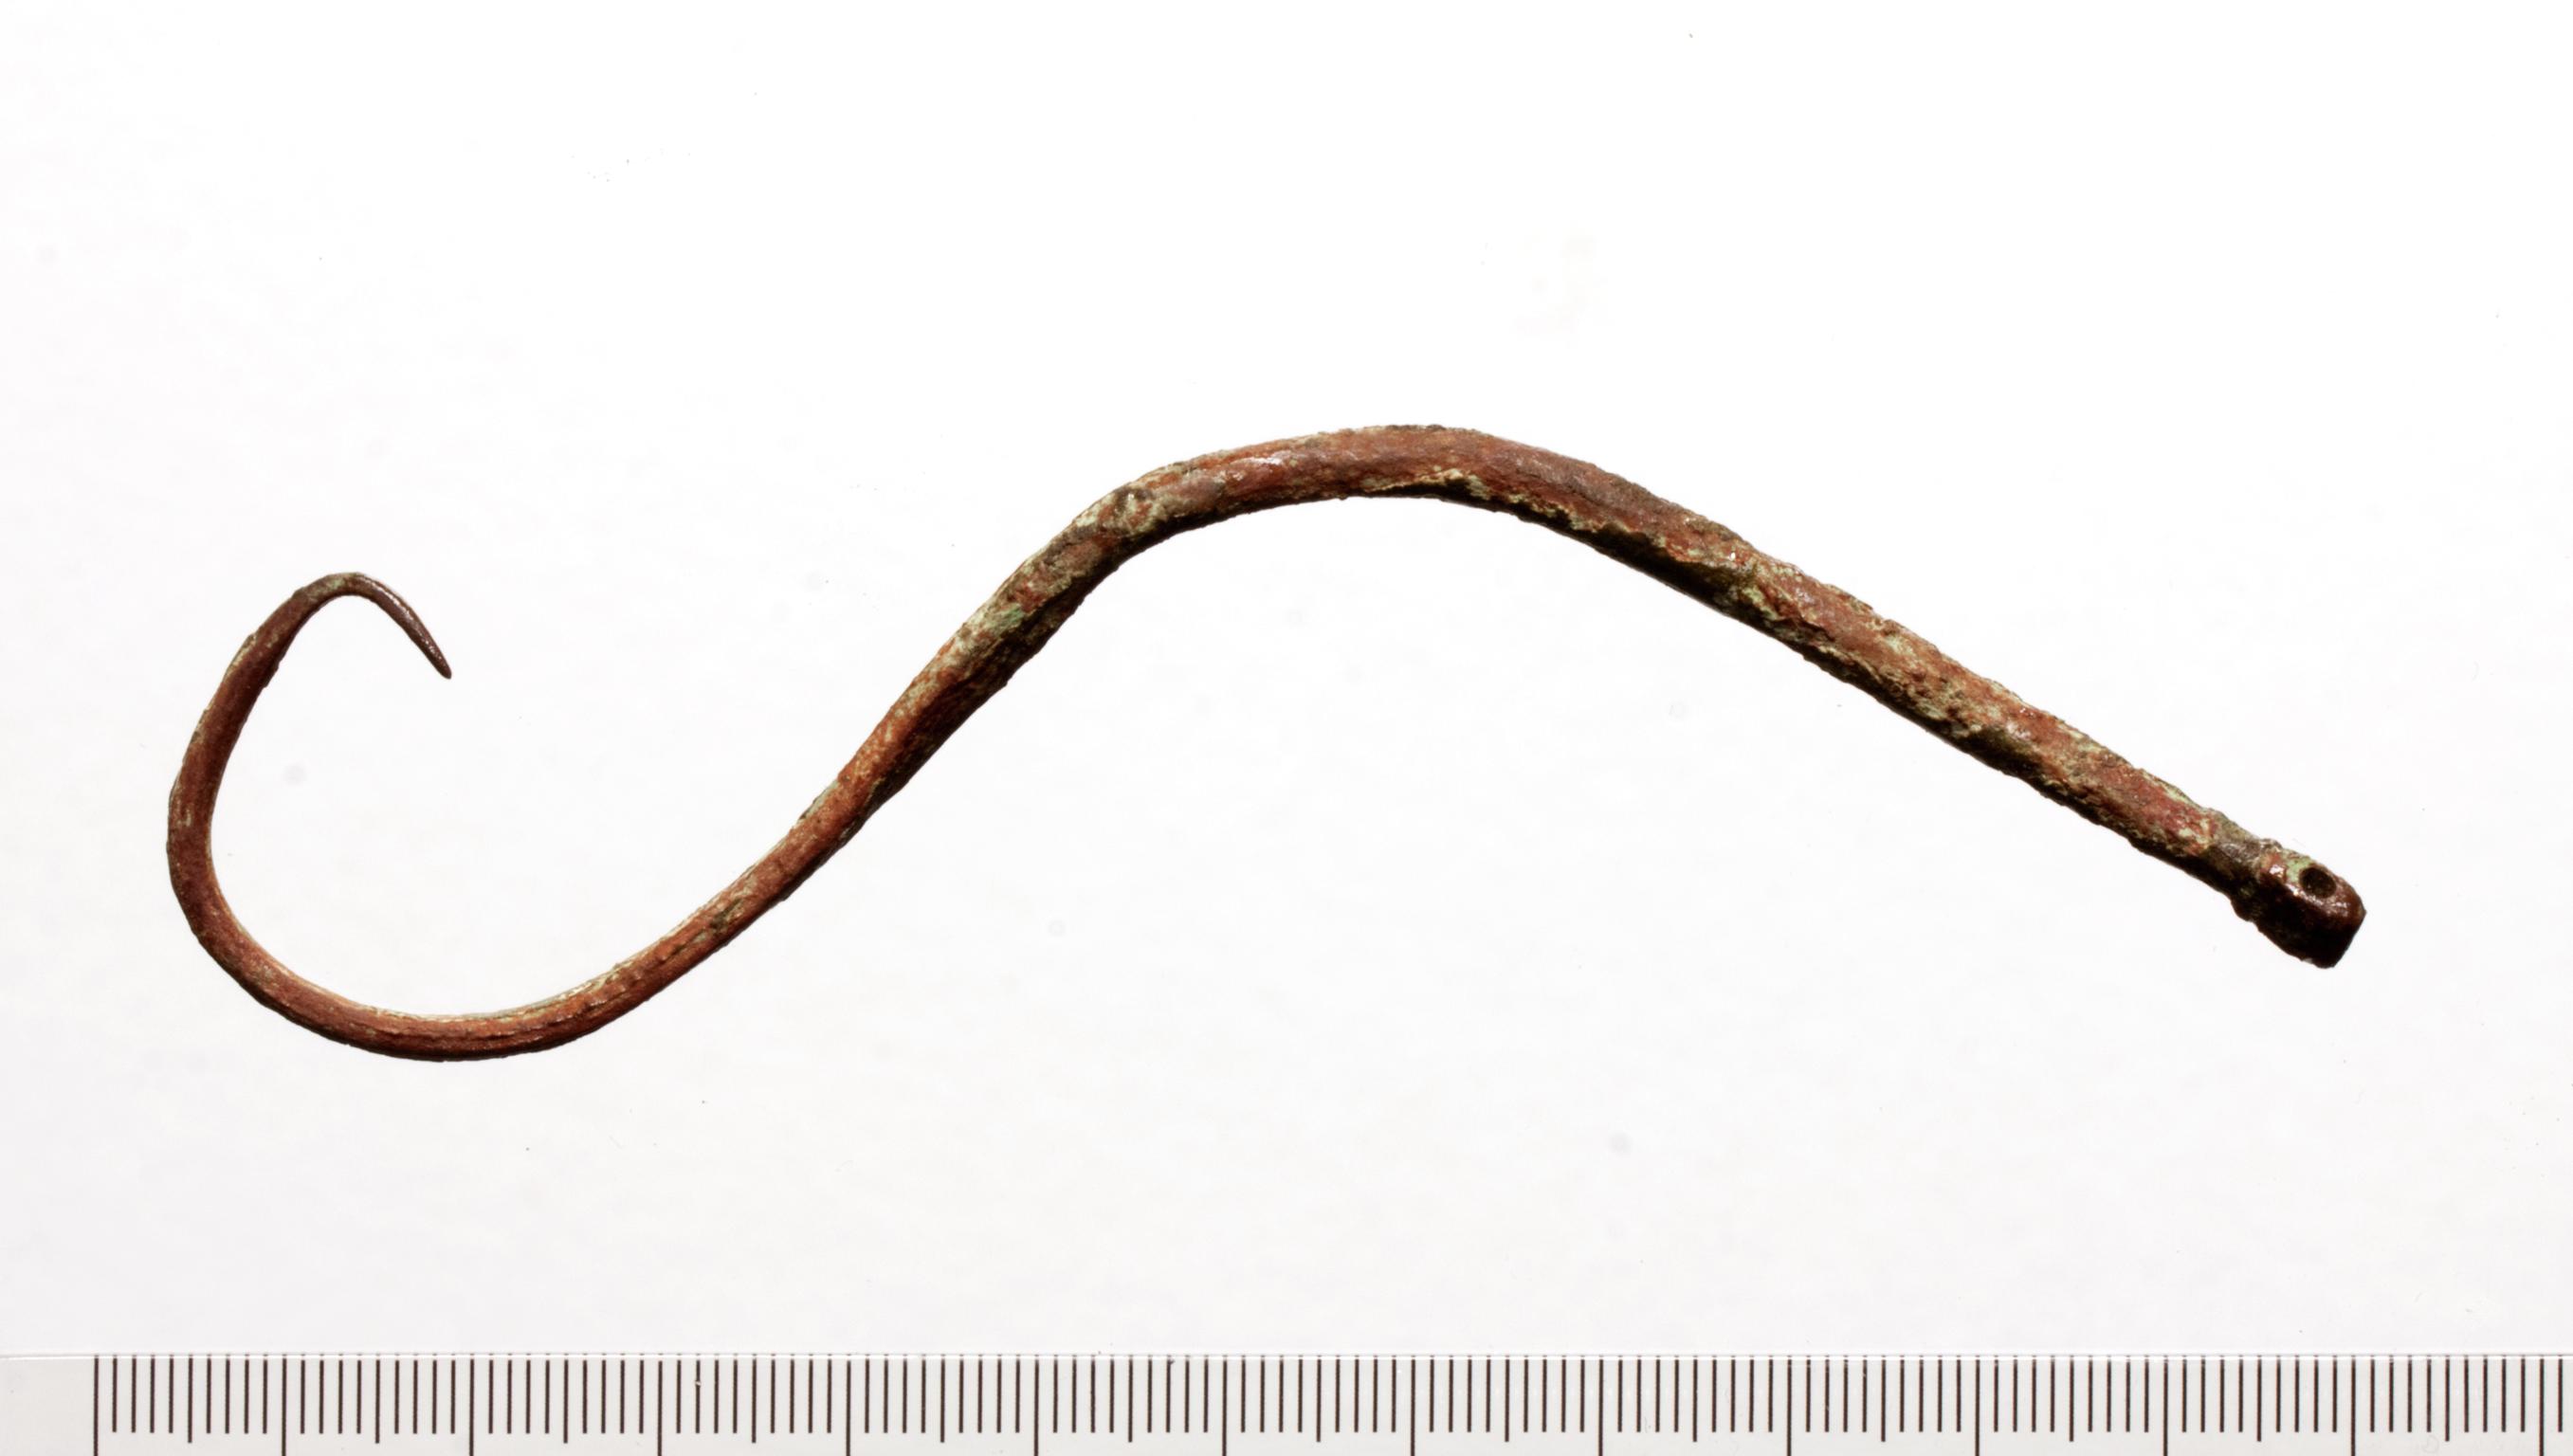 Early Medieval copper alloy ringed pin